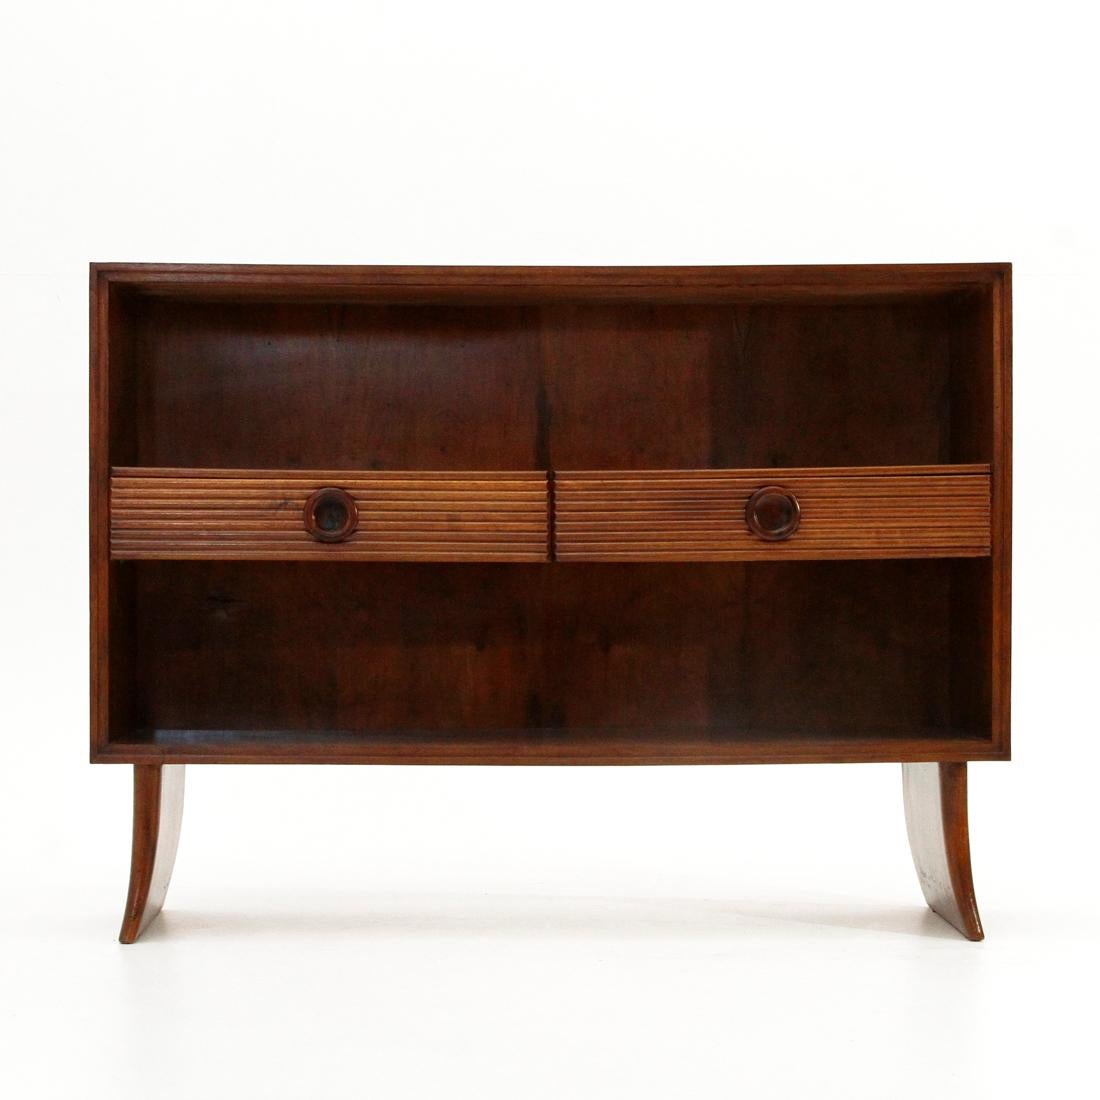 Cabinet designed in the 1930s by Paolo Buffa and executed by Galdino Maspero.
Structure in veneered wood.
Double drawer with front covered in grissinato wood and turned wood handle.
Shaped wooden legs.
Good general condition as completely